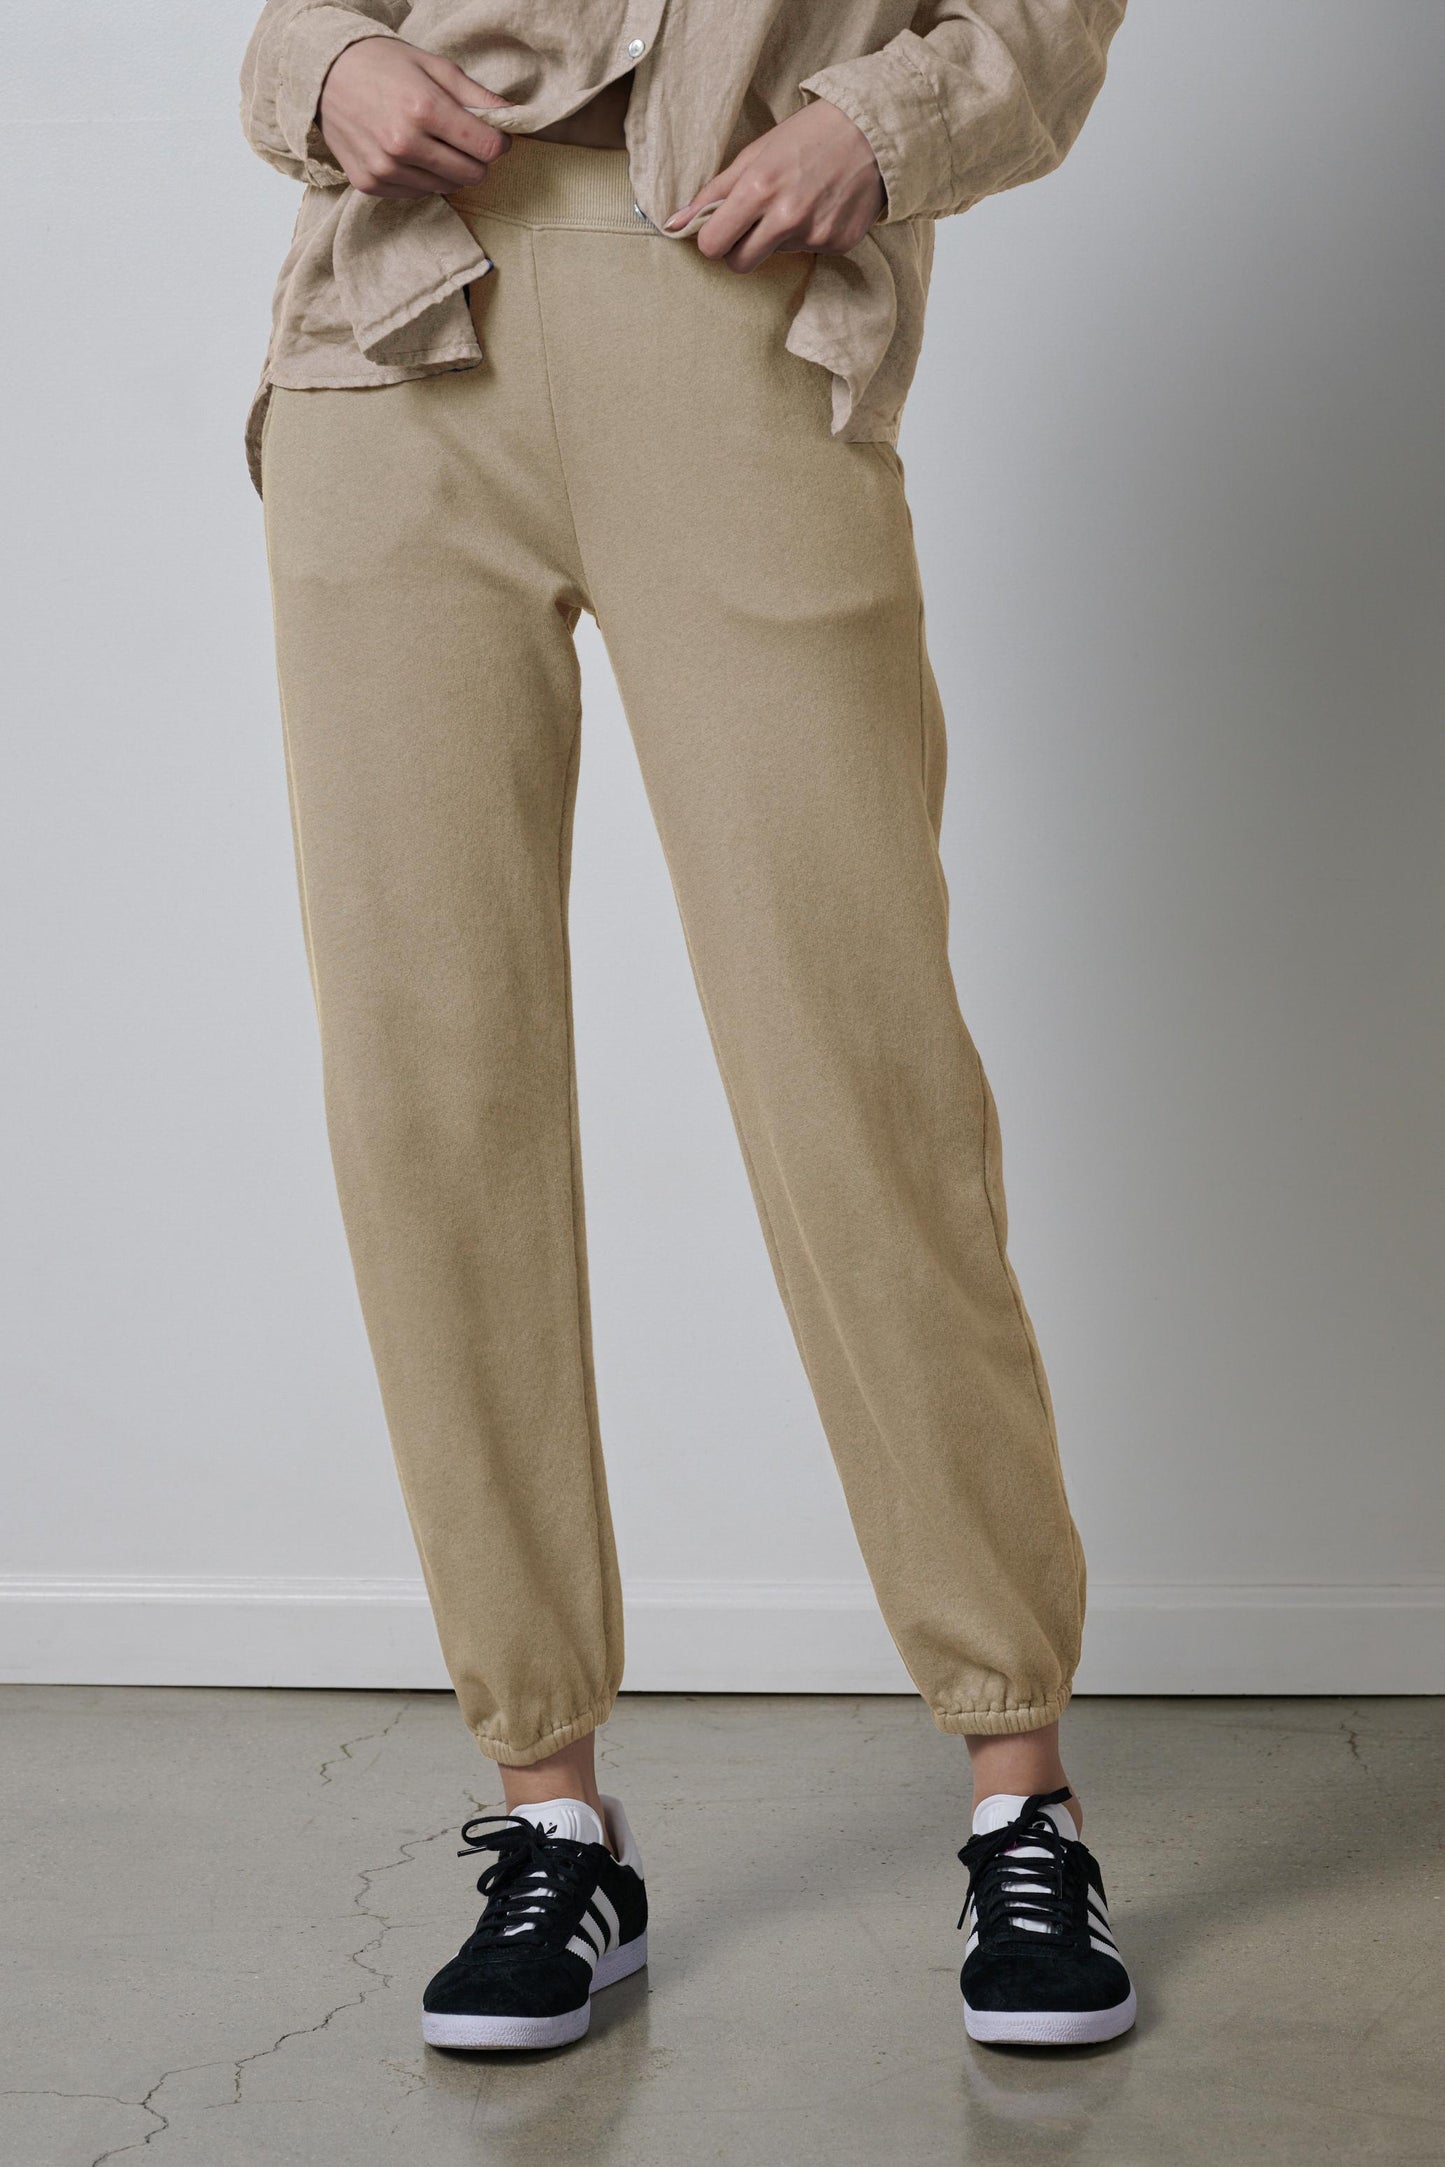 A person standing in a neutral pose wearing Velvet by Jenny Graham's ZUMA SWEATPANT, a beige jacket, and black sneakers.-36463615606977